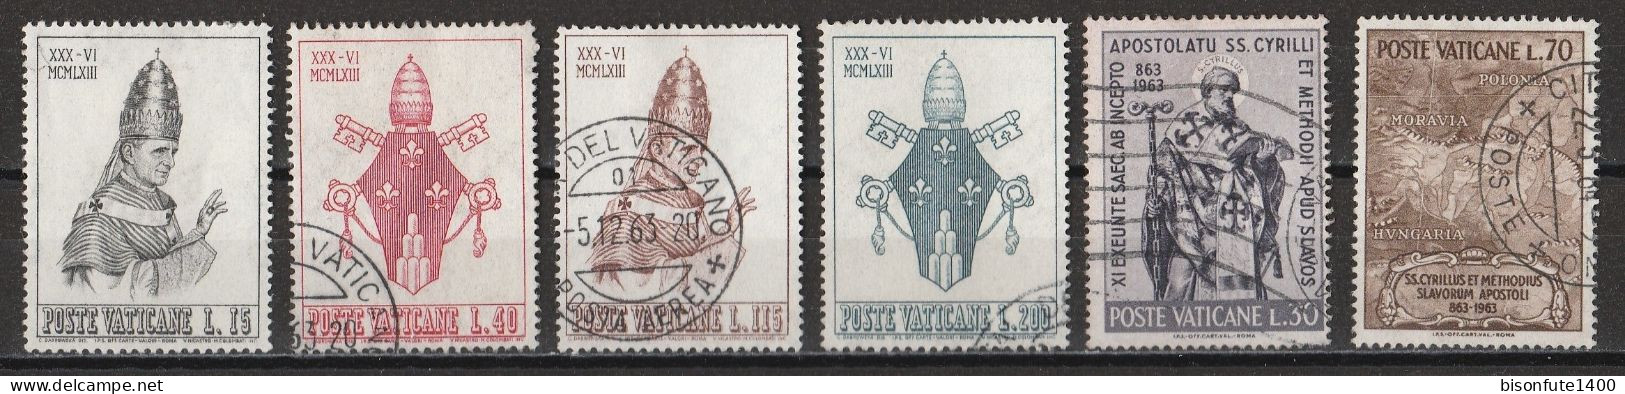 Vatican 1963 : Timbres Yvert & Tellier N° 374 - 375 - 376 - 380 - 381 - 382 - 383 - 384 - 385 - 386 - 387 - 388 -....... - Usados